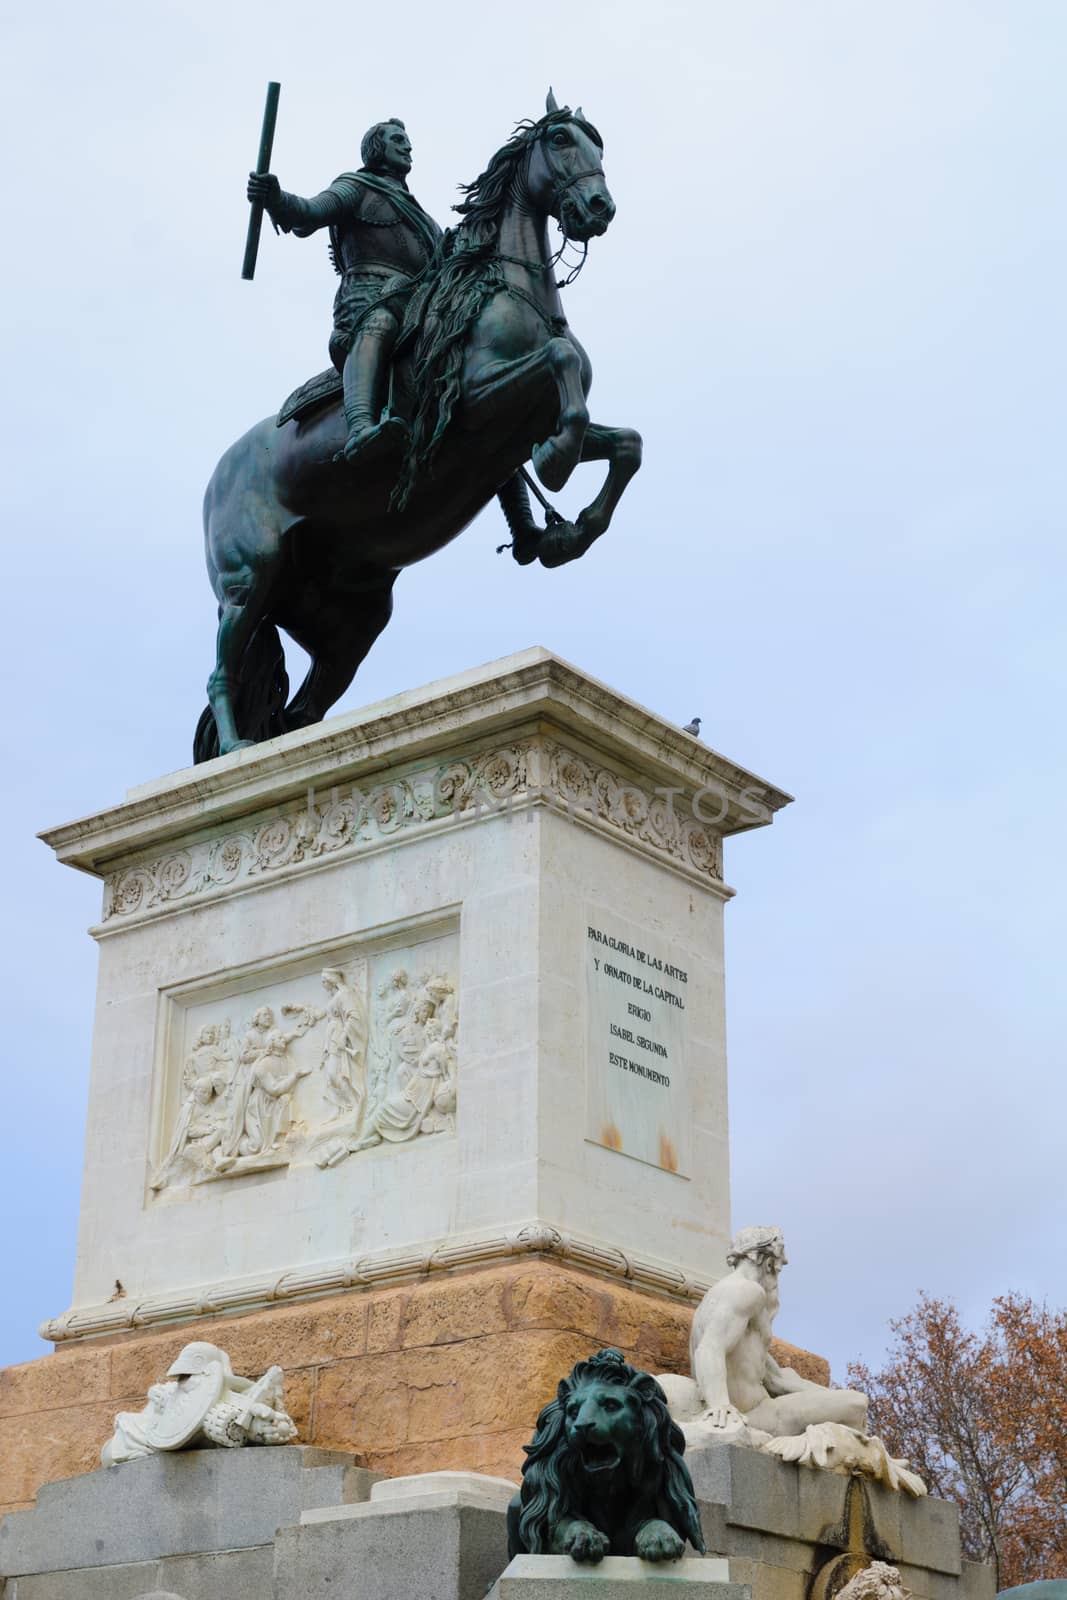 The Monument to Philip IV or Fountain of Philip IV, dated to the first half of the 19th century, in Plaza de Oriente, Madrid, Spain